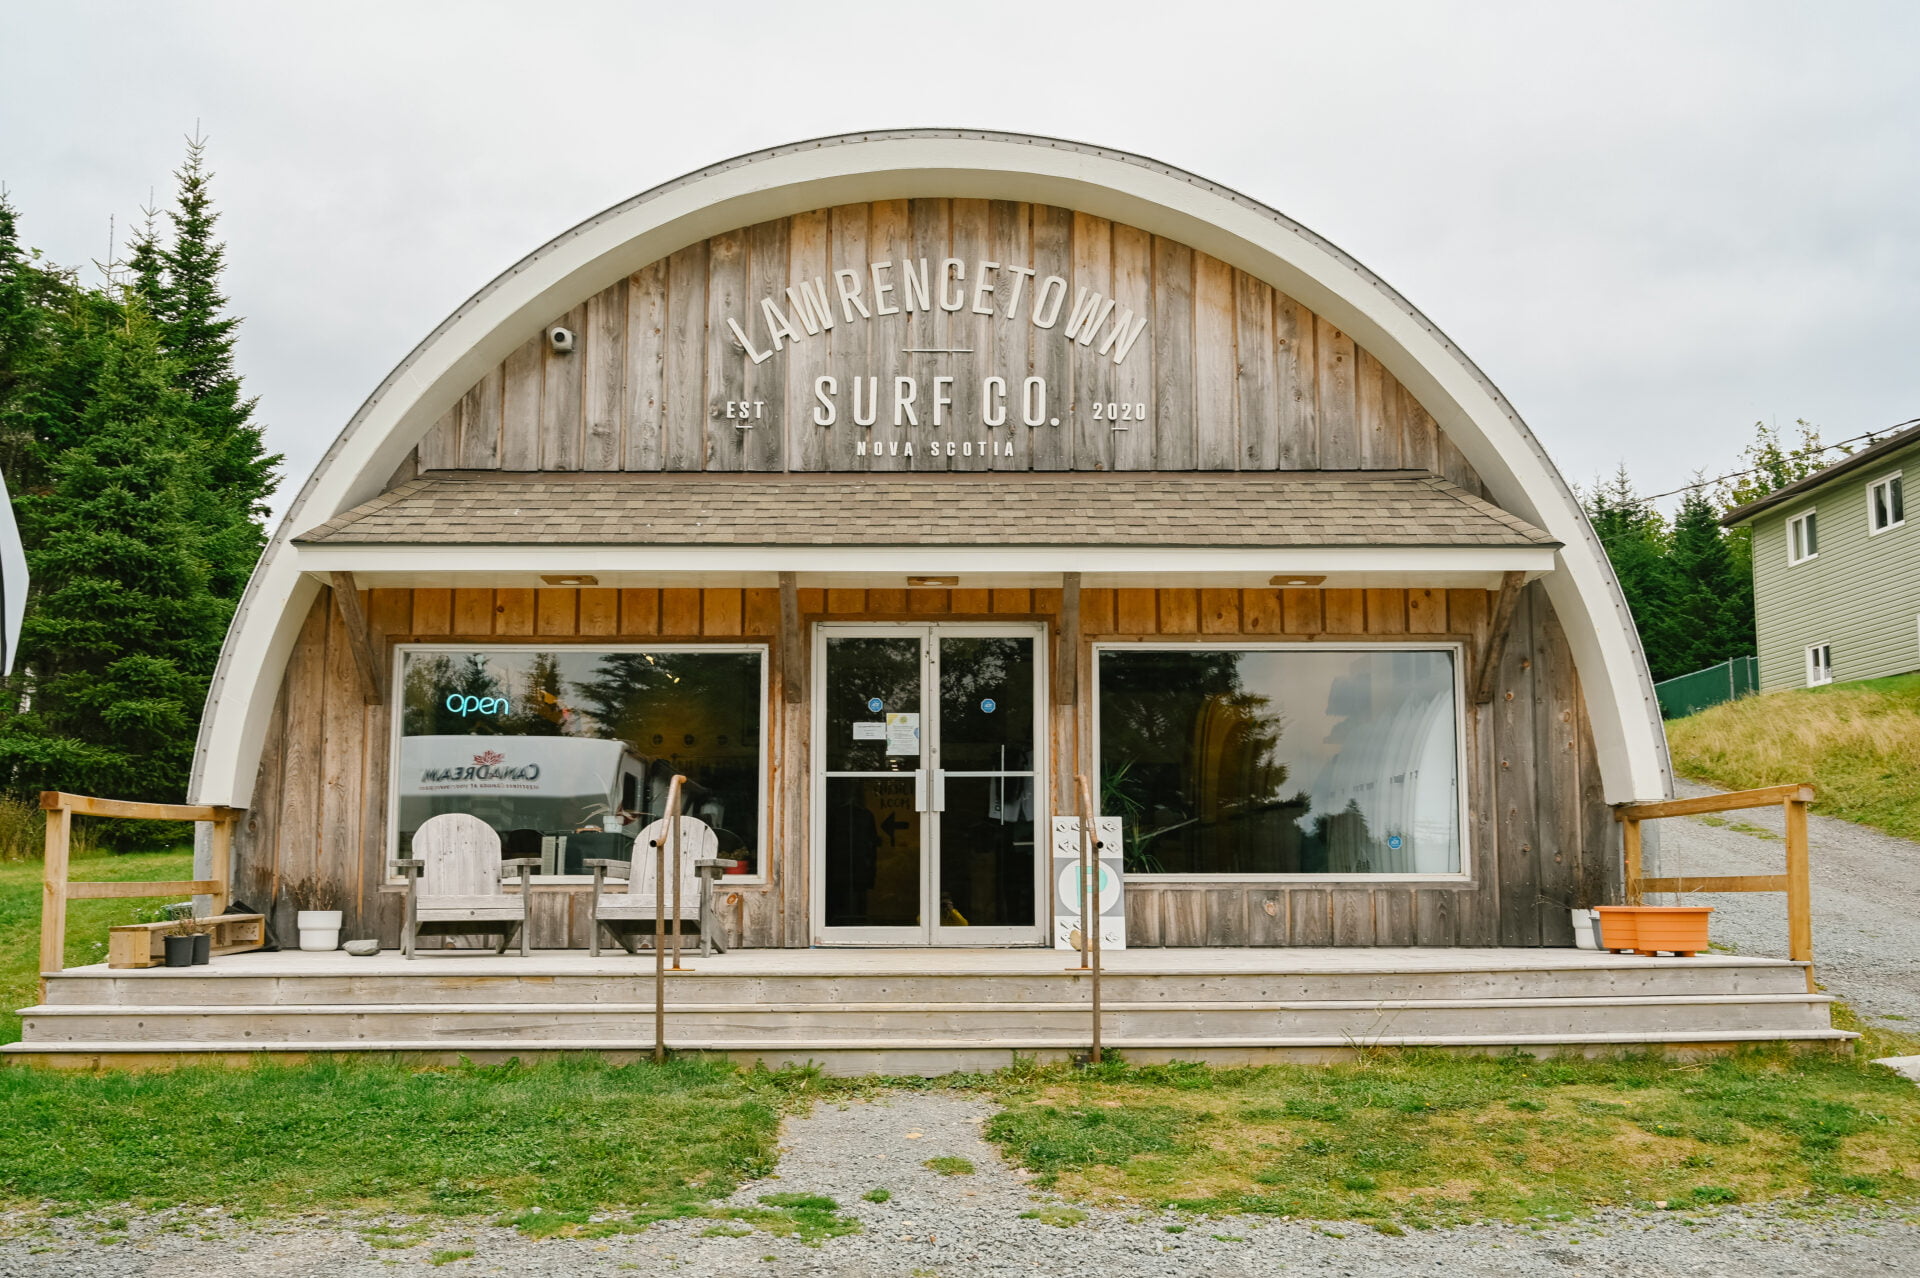 Lawrencetown Surf Shop, a must stop on your Halifax road trip